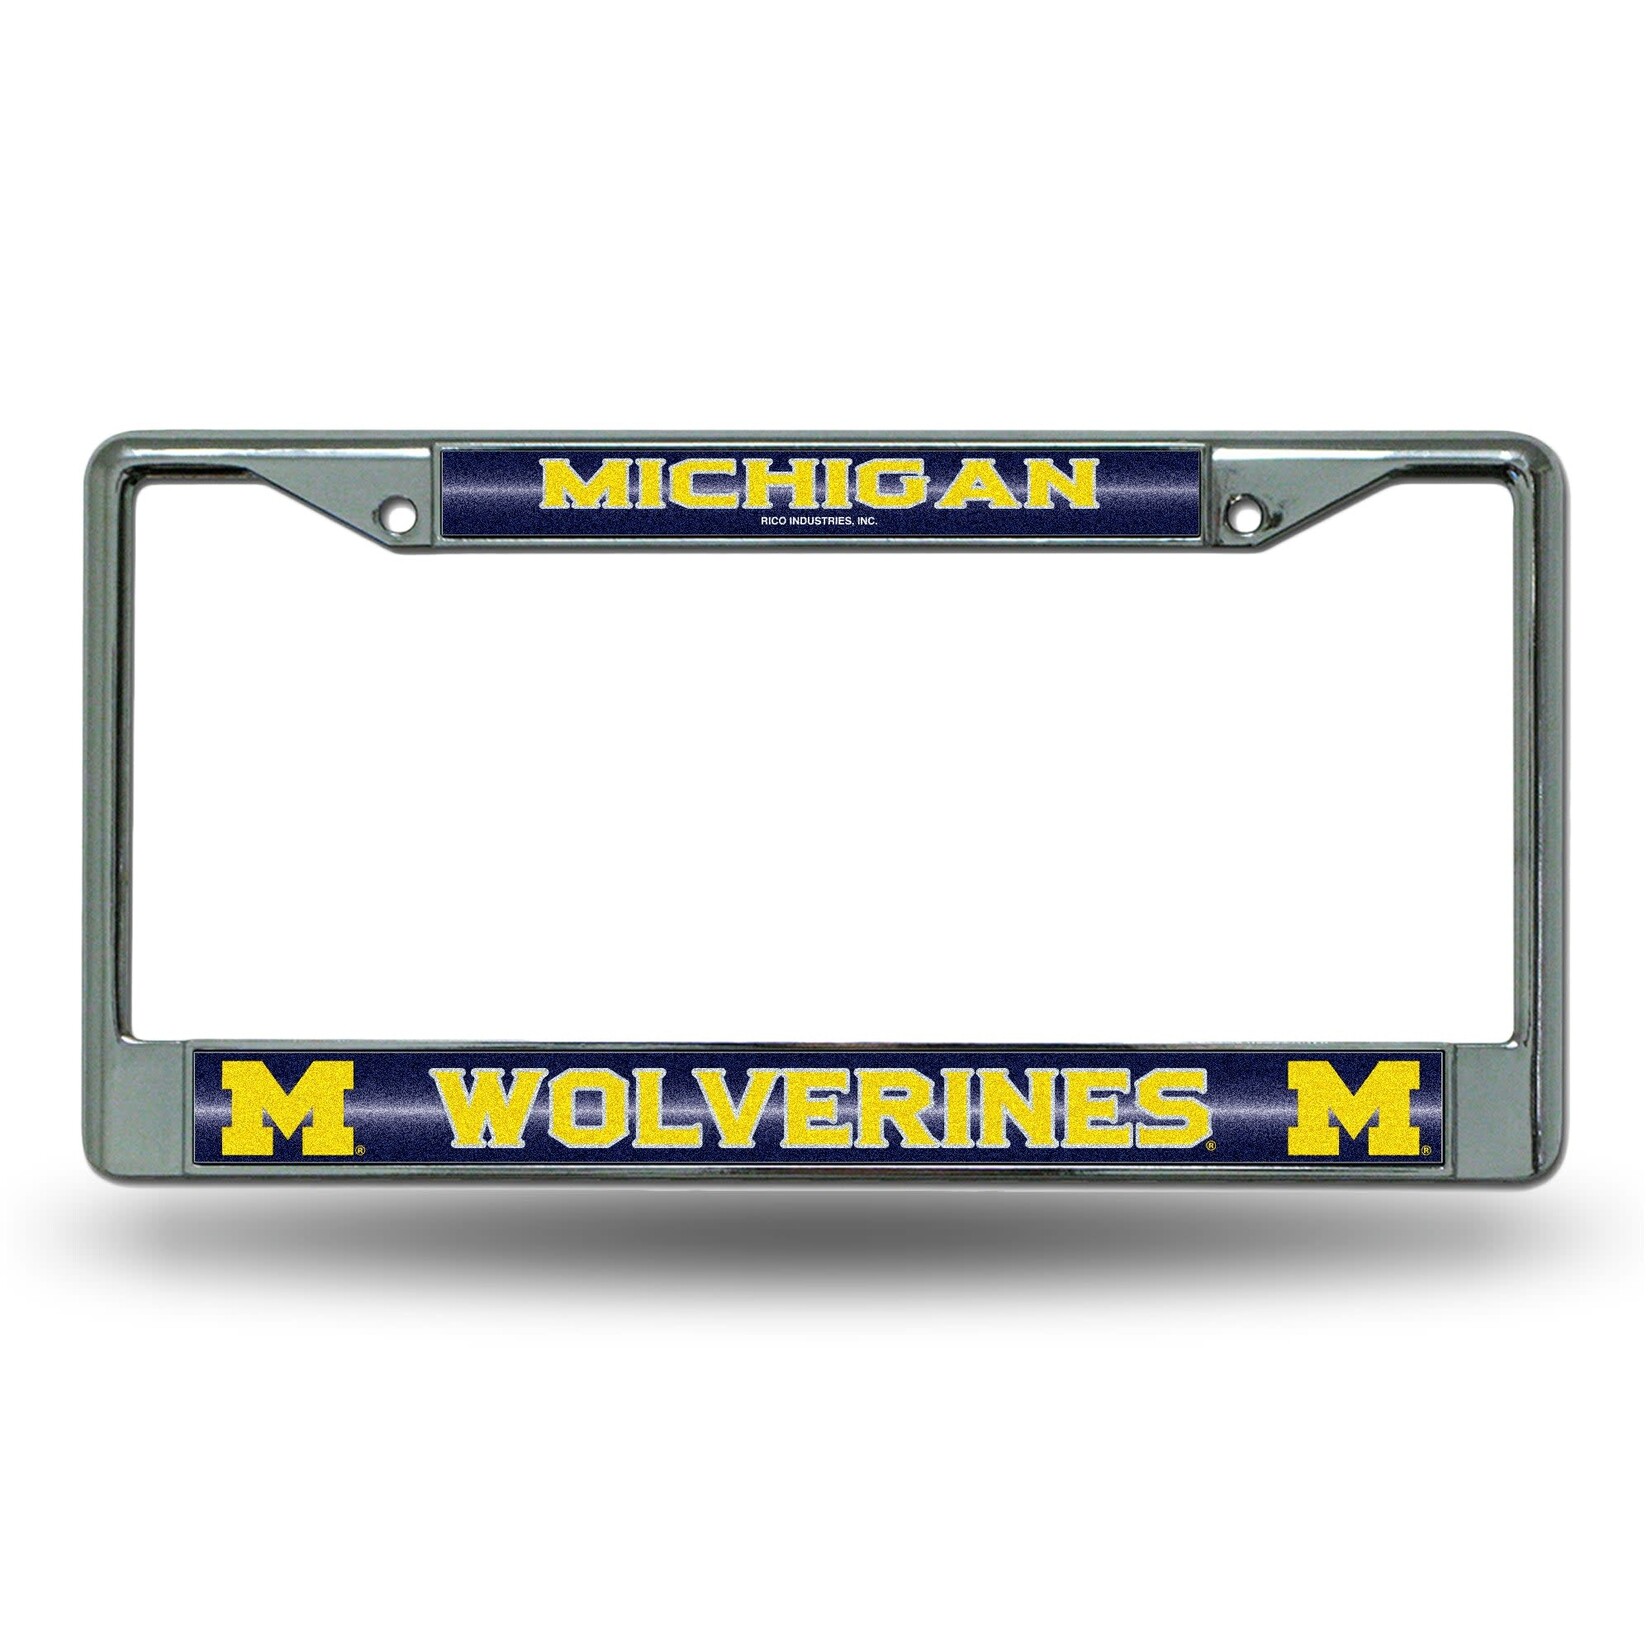 Rico NCAA Michigan Wolverines Auto License Plate Frame Bling Chrome Glitter